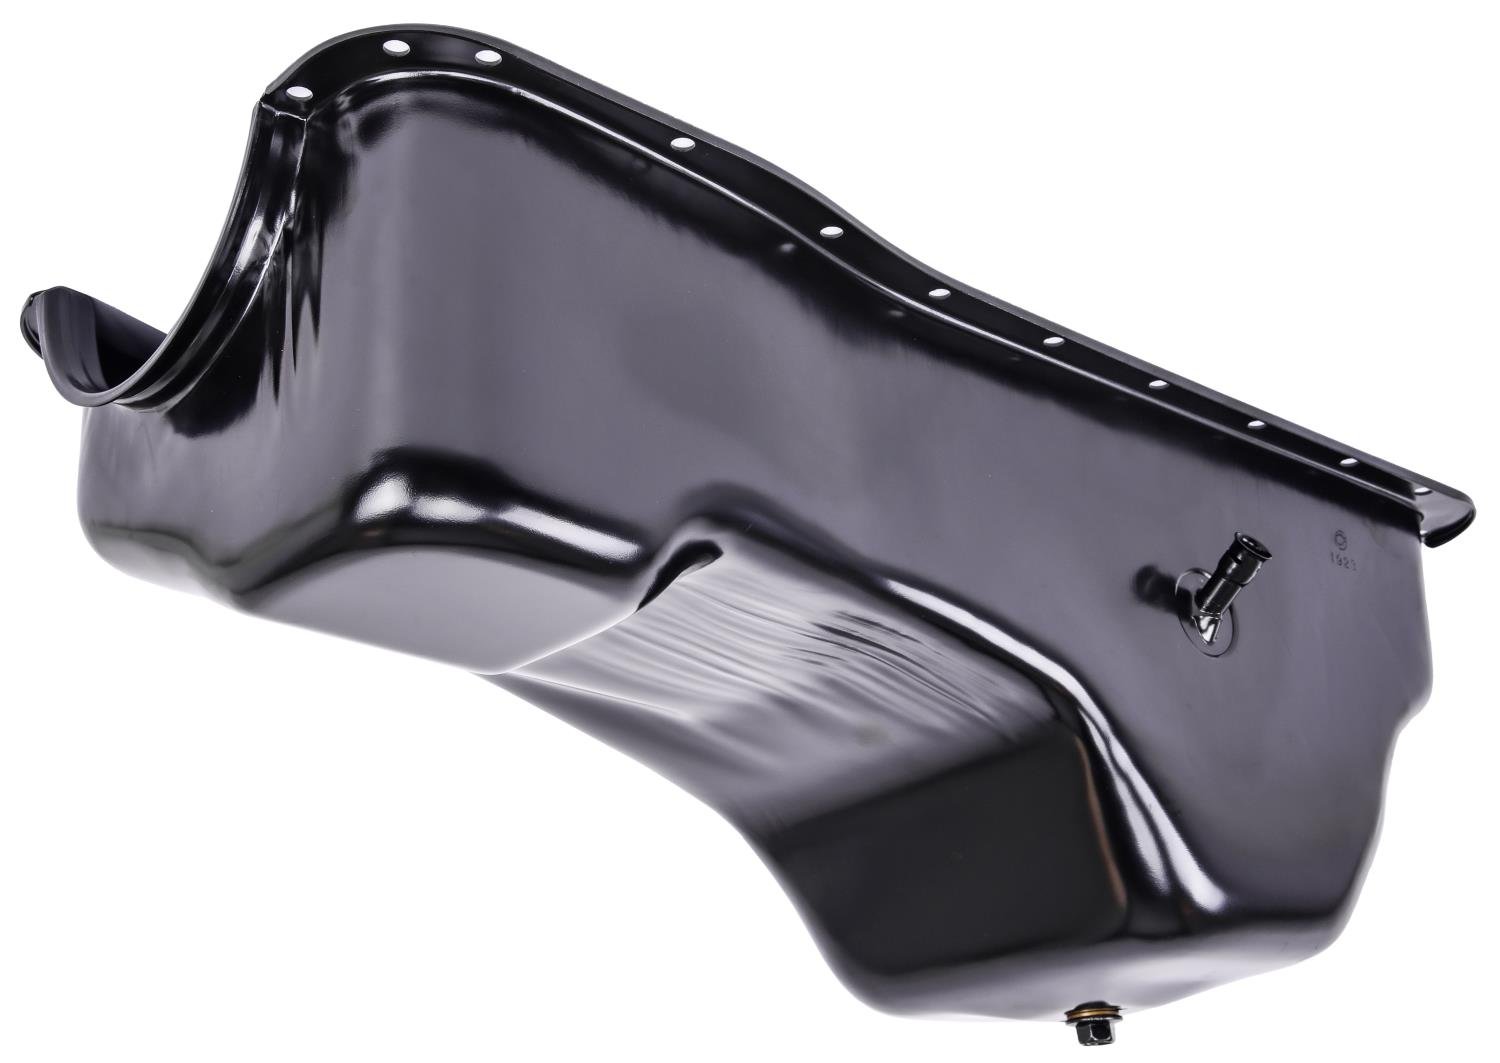 Stock-Style Replacement Oil Pan for Select 1993-1997 Ford F-Series Trucks 460 ci/7.5L [Black]